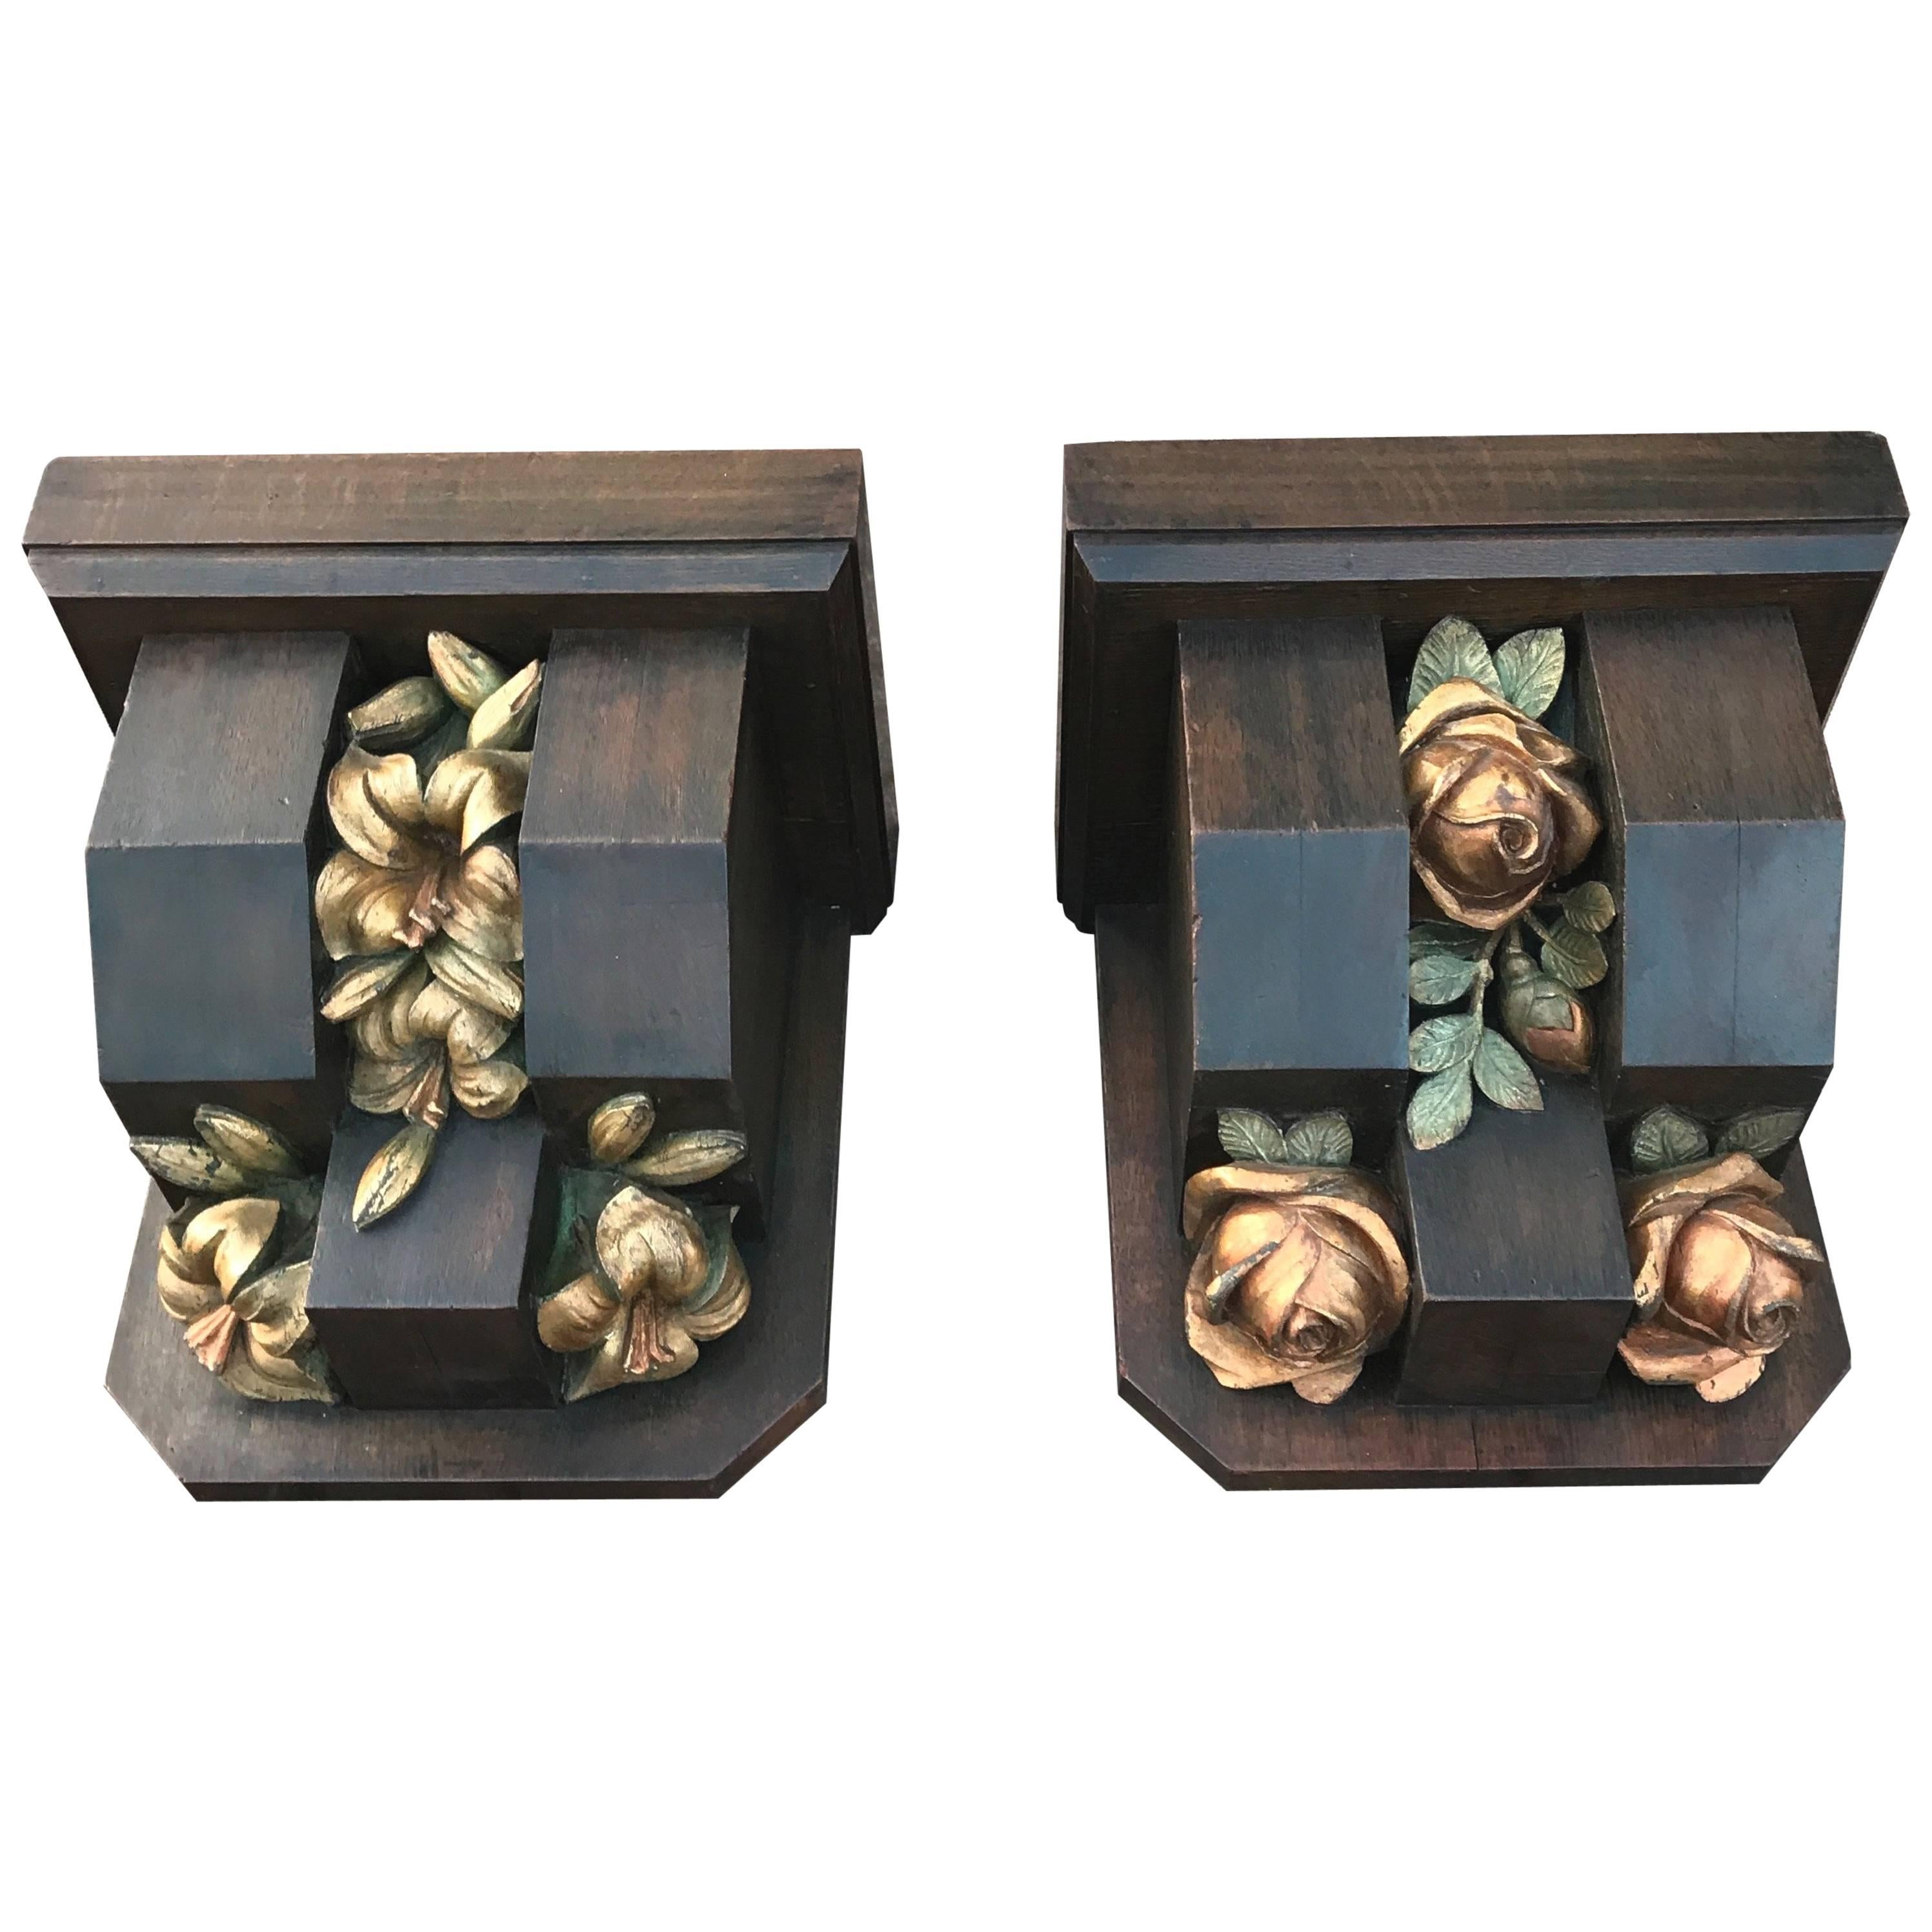 Pair Large Gothic Revival Wall Brackets or Corbels w. Beautifully Roses & Lilies